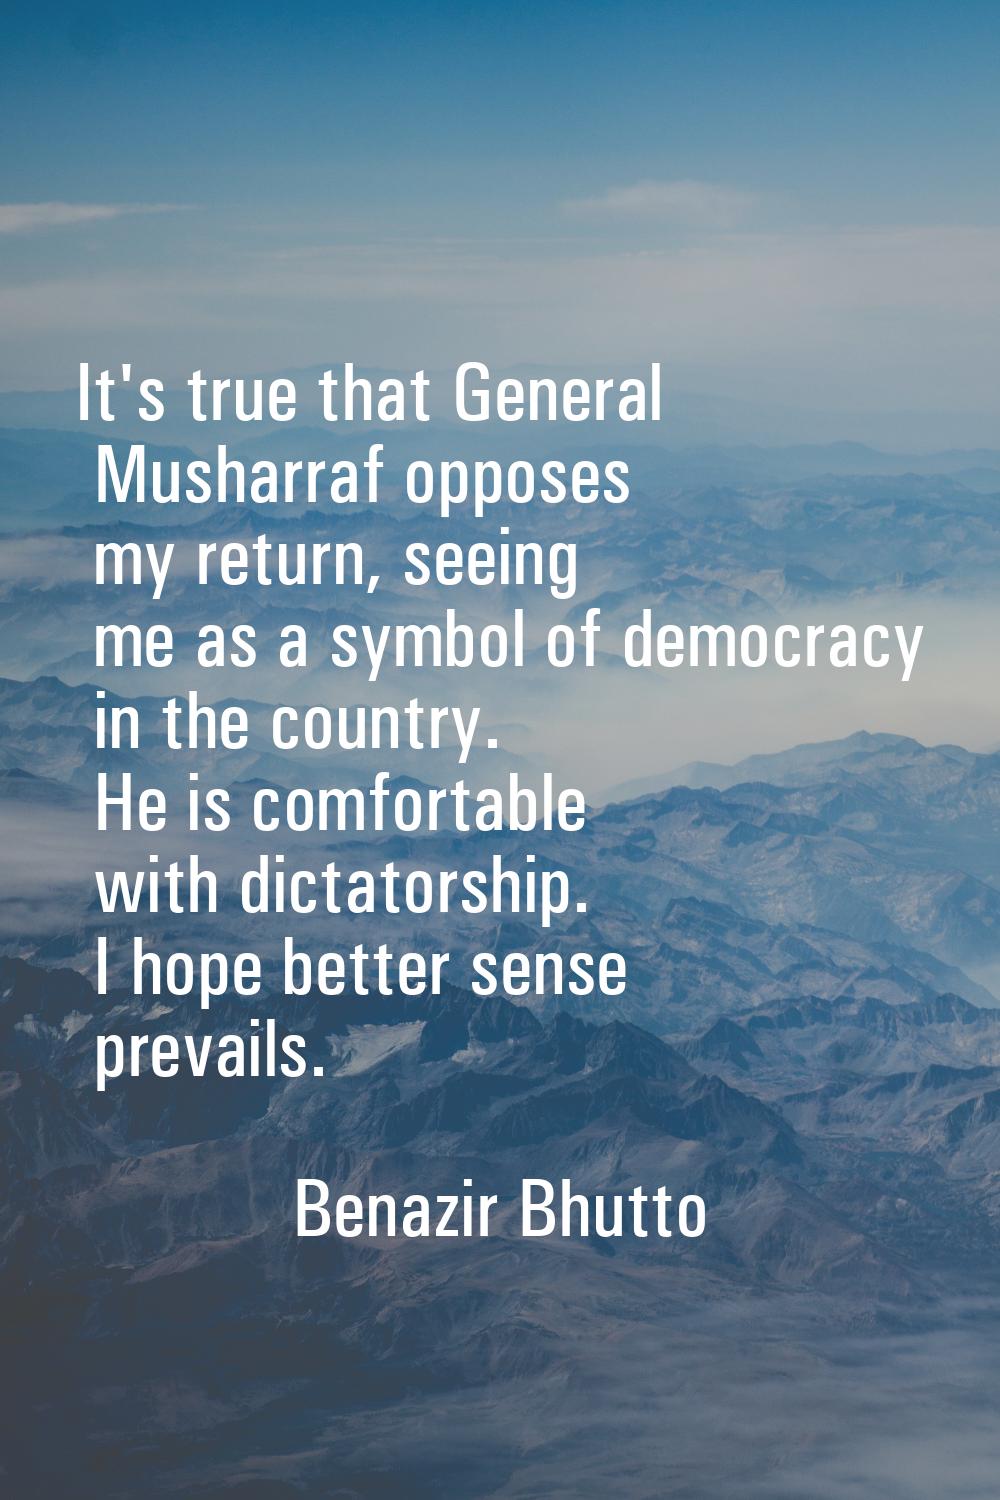 It's true that General Musharraf opposes my return, seeing me as a symbol of democracy in the count